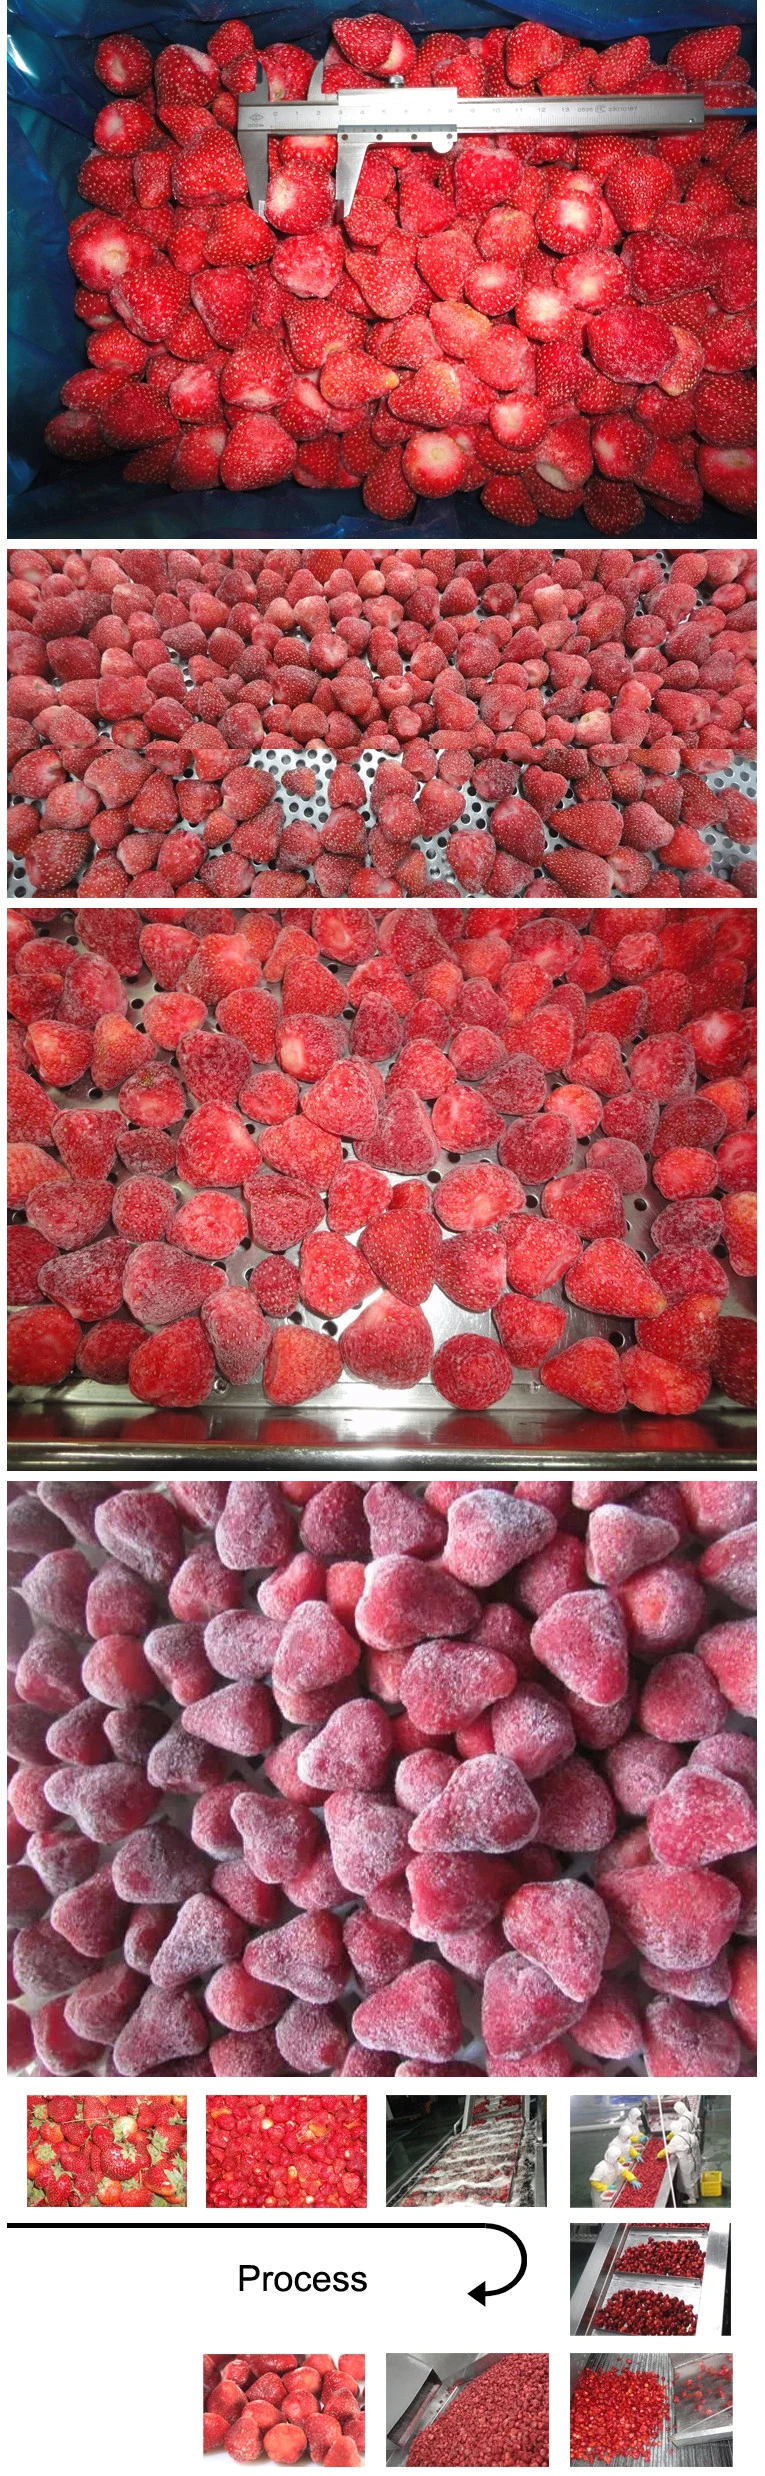 IQF Quality Frozen Berries and Fruits Top Grade Strawberry